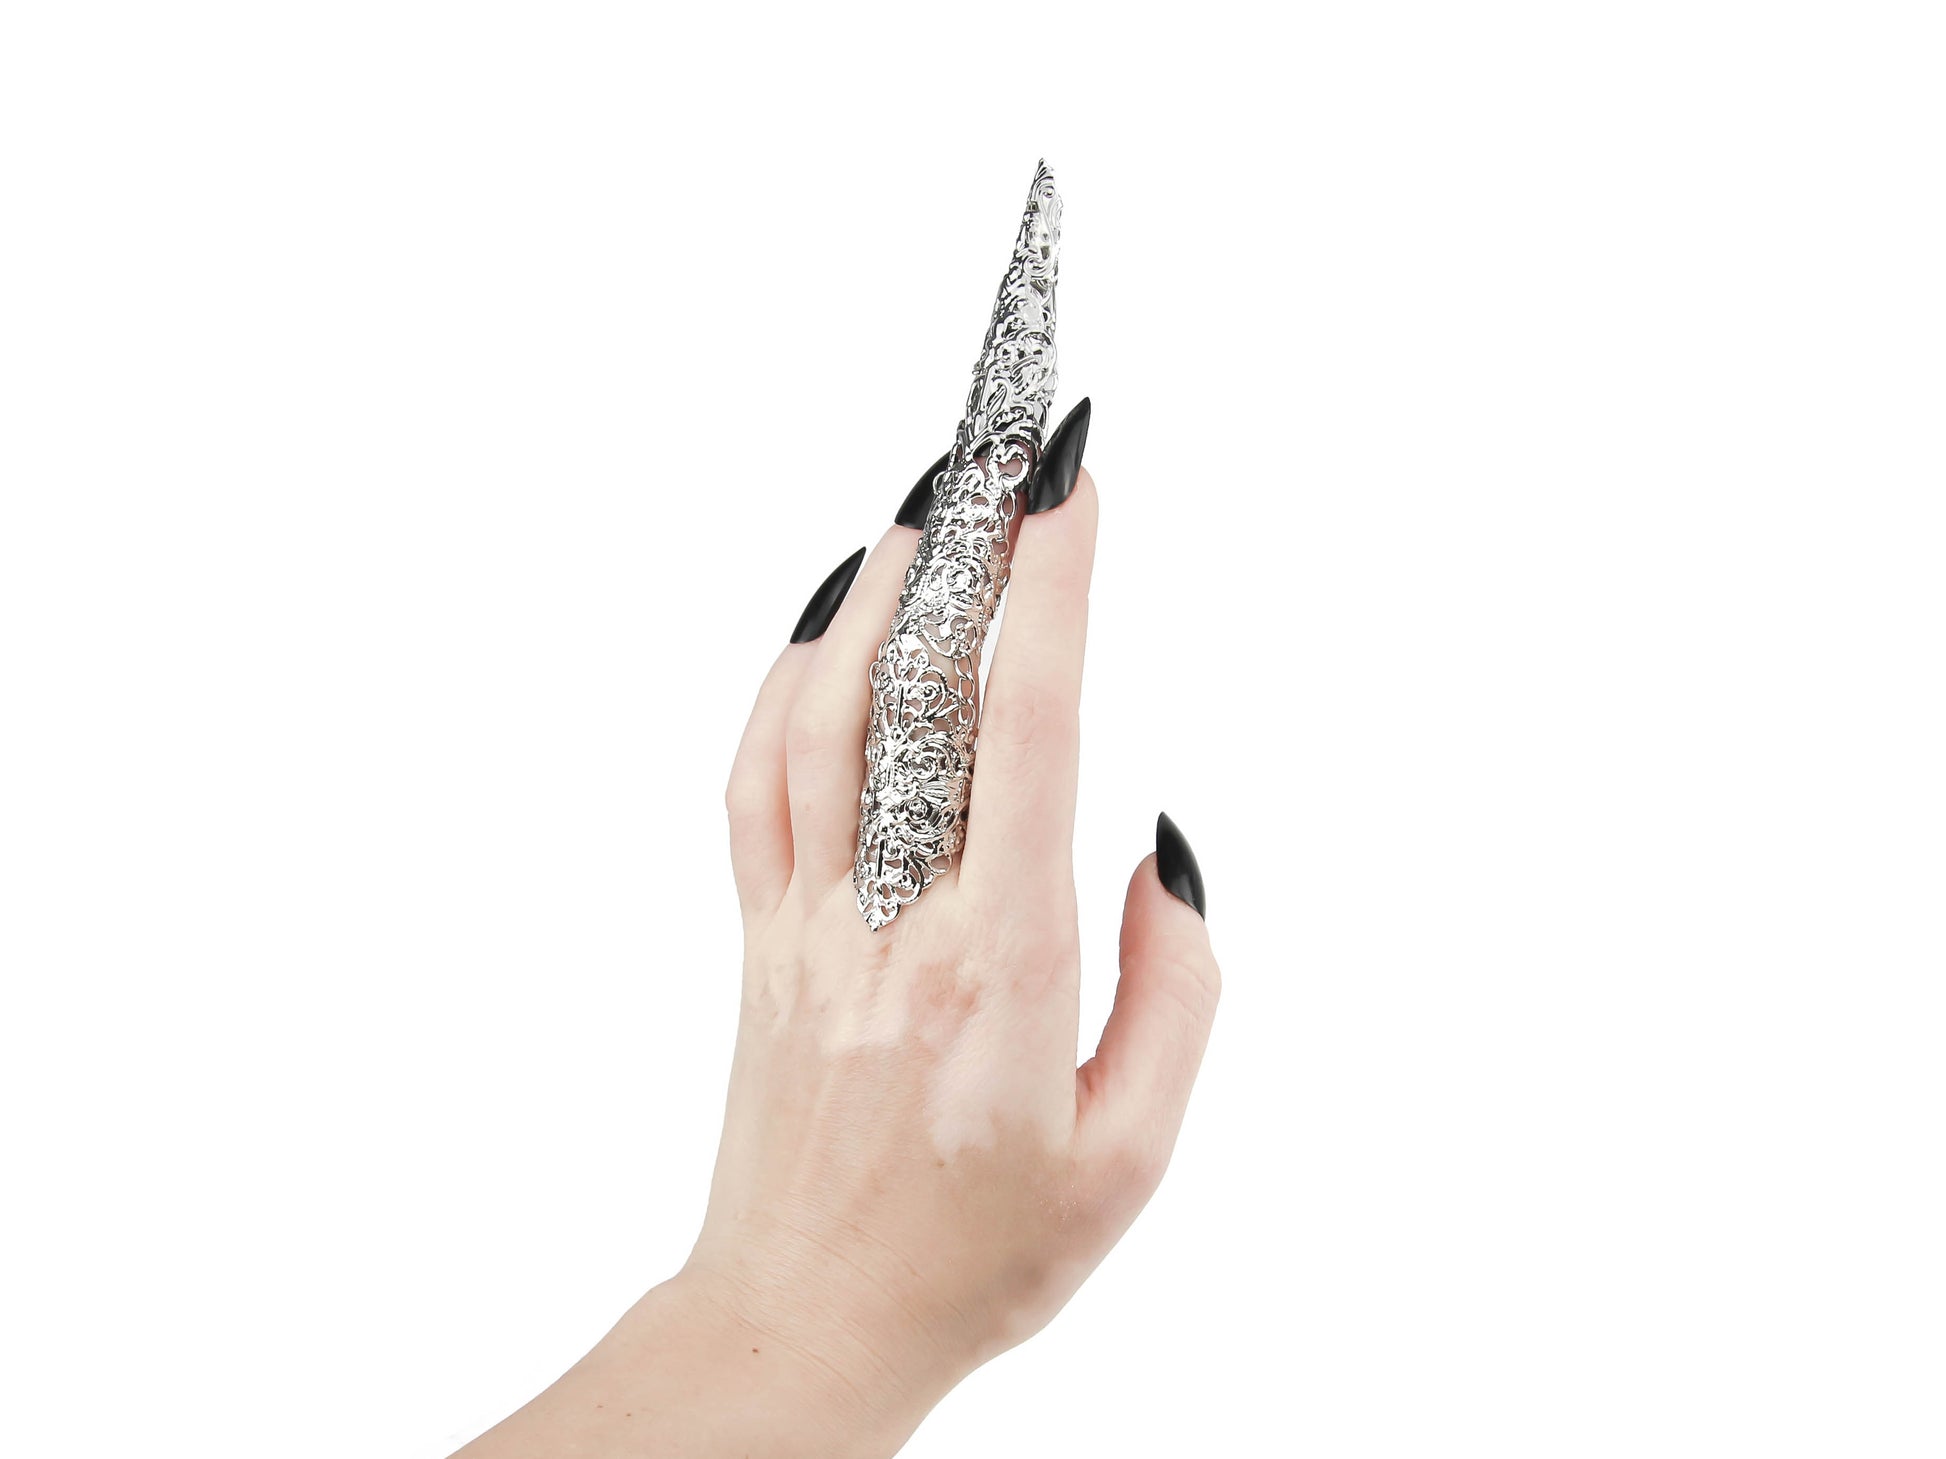 An elegant hand models a Myril Jewels full finger claw ring with a sleek long nail claw, epitomizing dark avant-garde style. This piece blends Neo Gothic and Halloween Jewelry aesthetics, perfect for gothic-chic fashion lovers seeking bold, everyday wear or dramatic festival accents